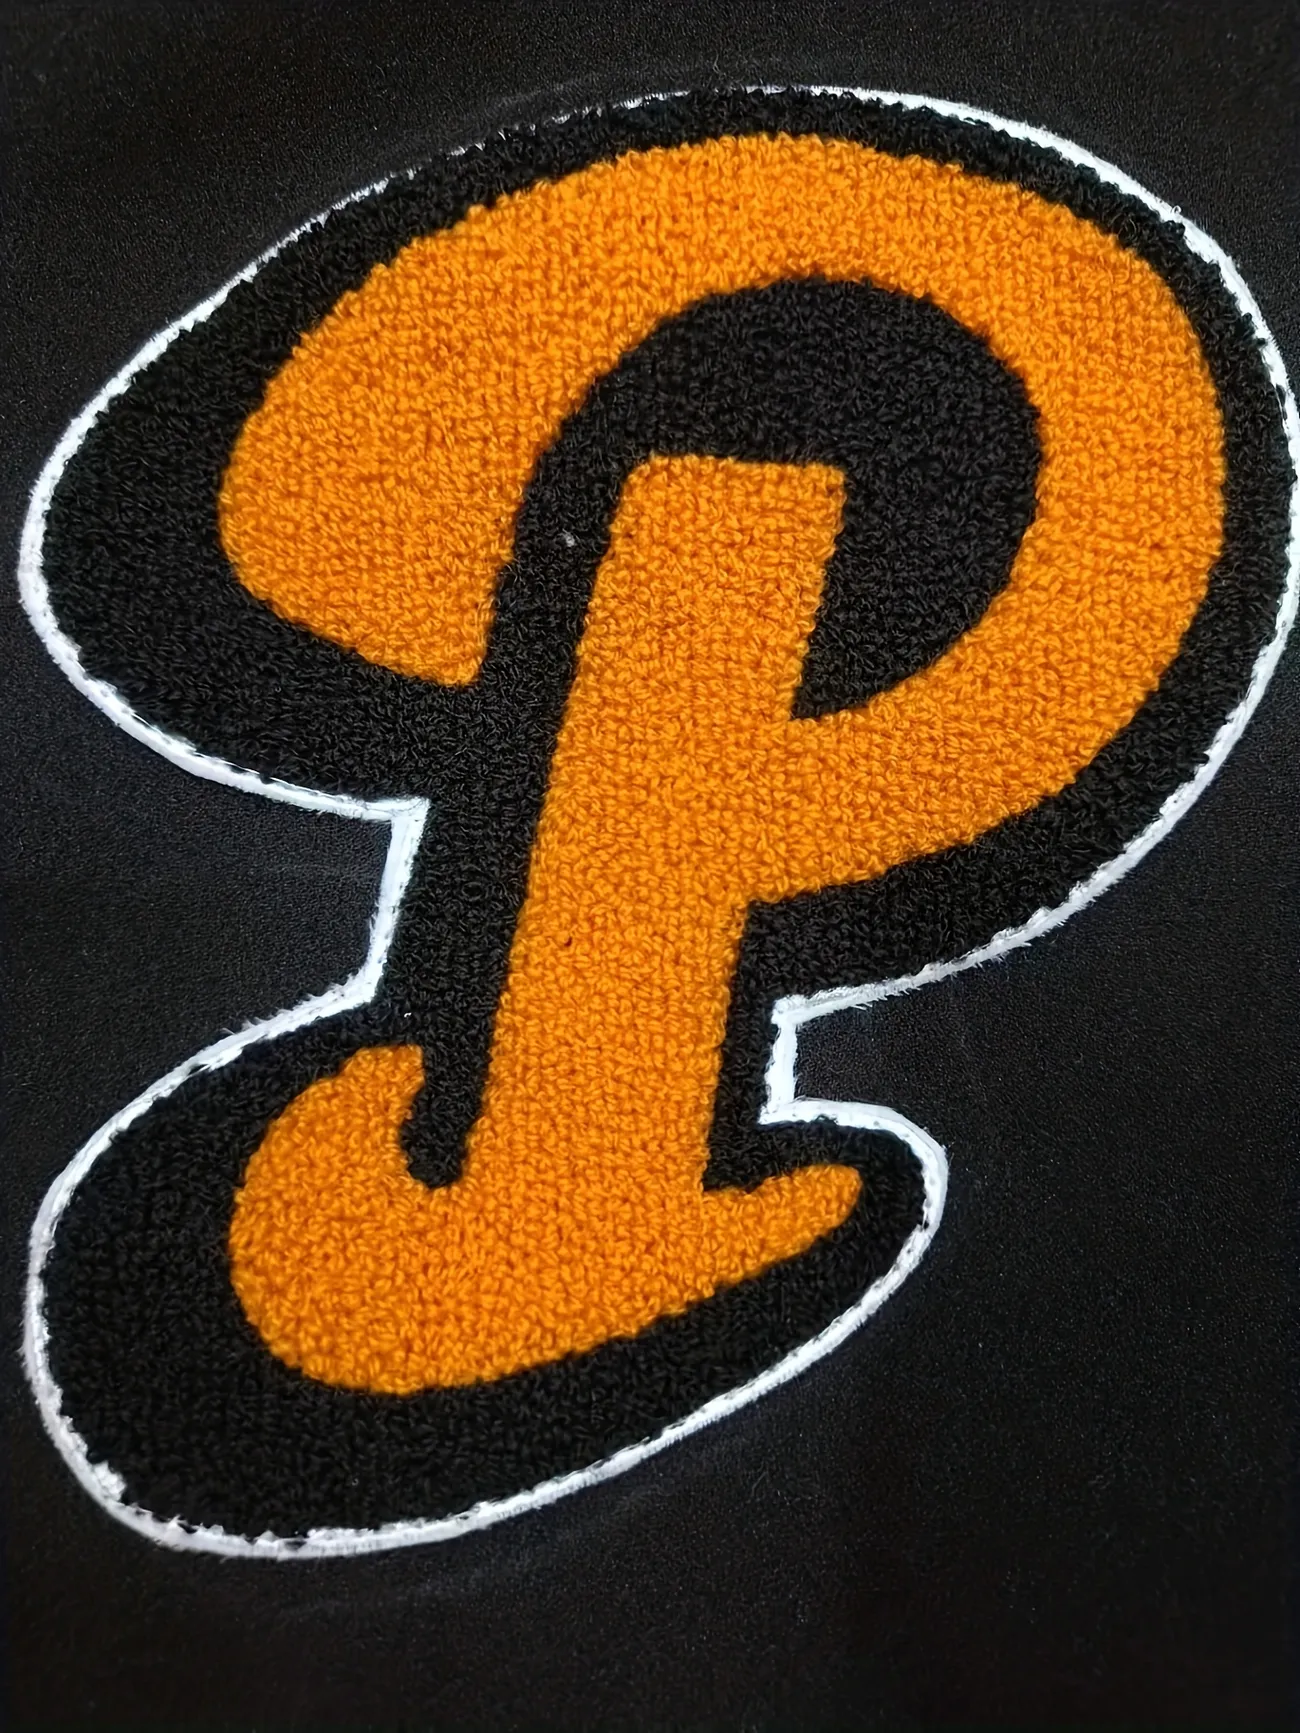 Pittsburgh Pirates Letter P Patch Size 5 x 5 inches Black and